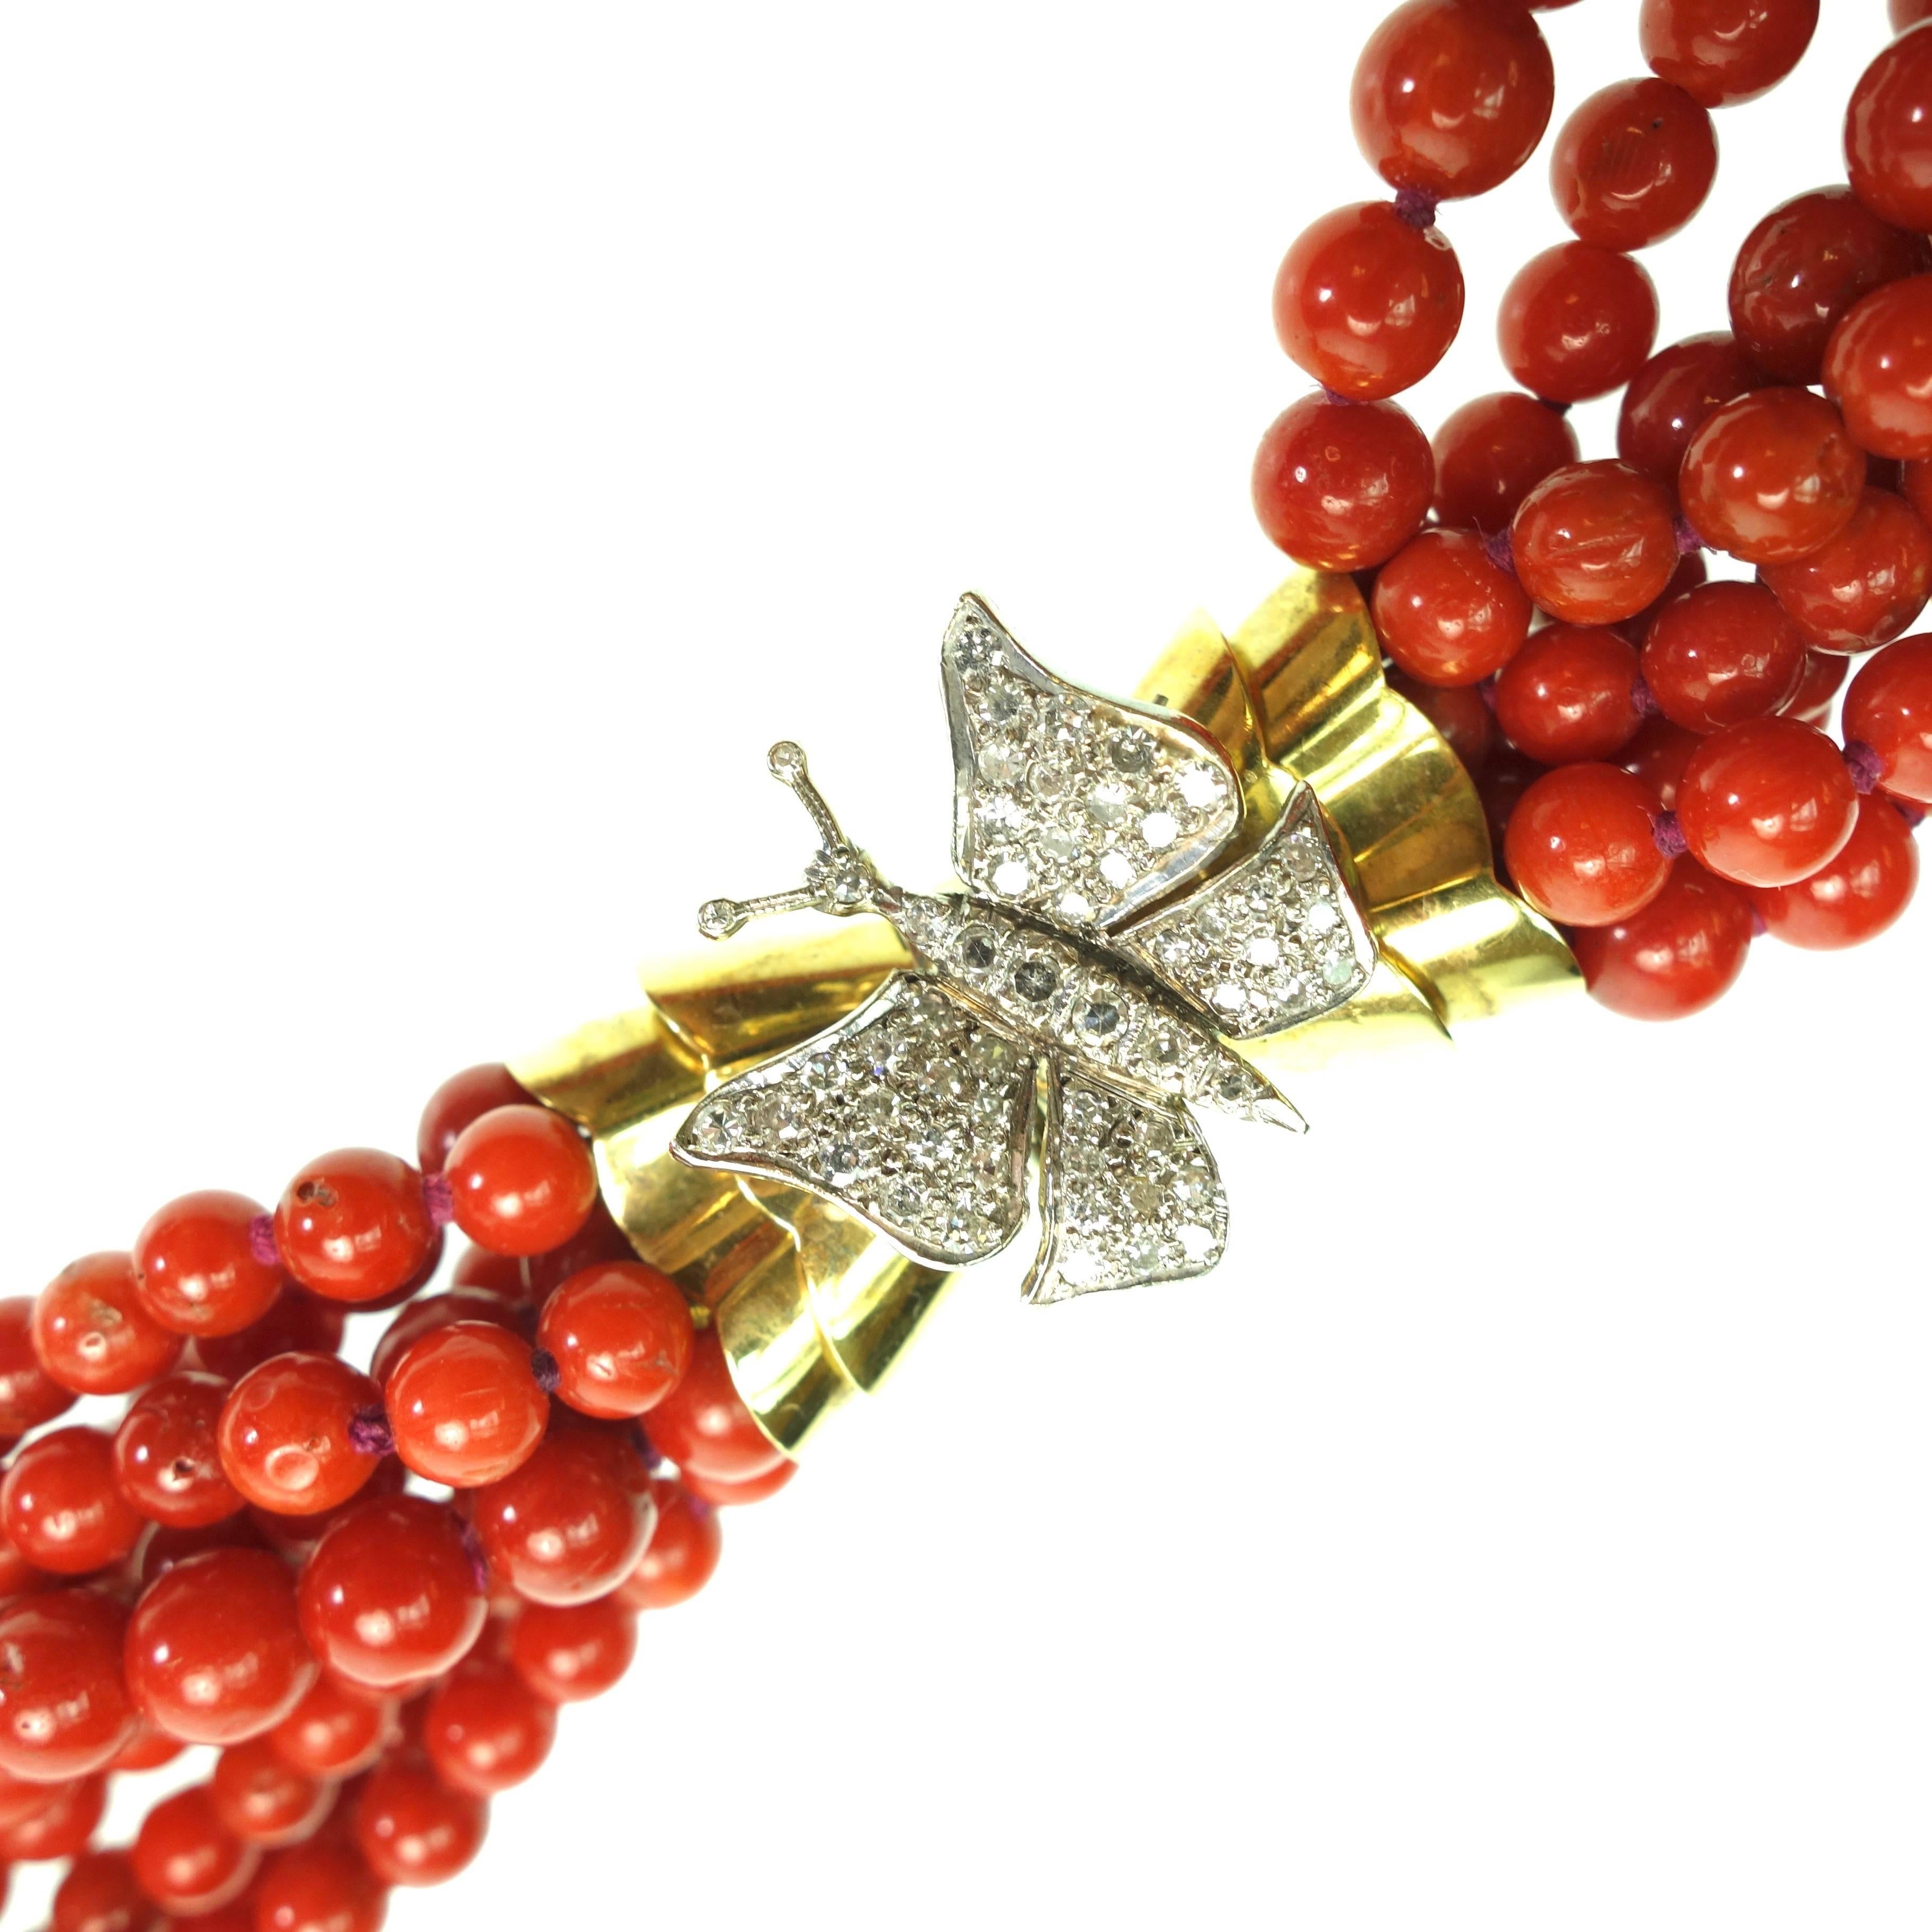 Gorgeous multi strand coral bead necklace in 30 inch opera length. There are nine strands of natural red coral beads terminating in an 18K yellow and white gold diamond set butterfly station. The beads measure from 4.5mm up to 6mm in diameter.